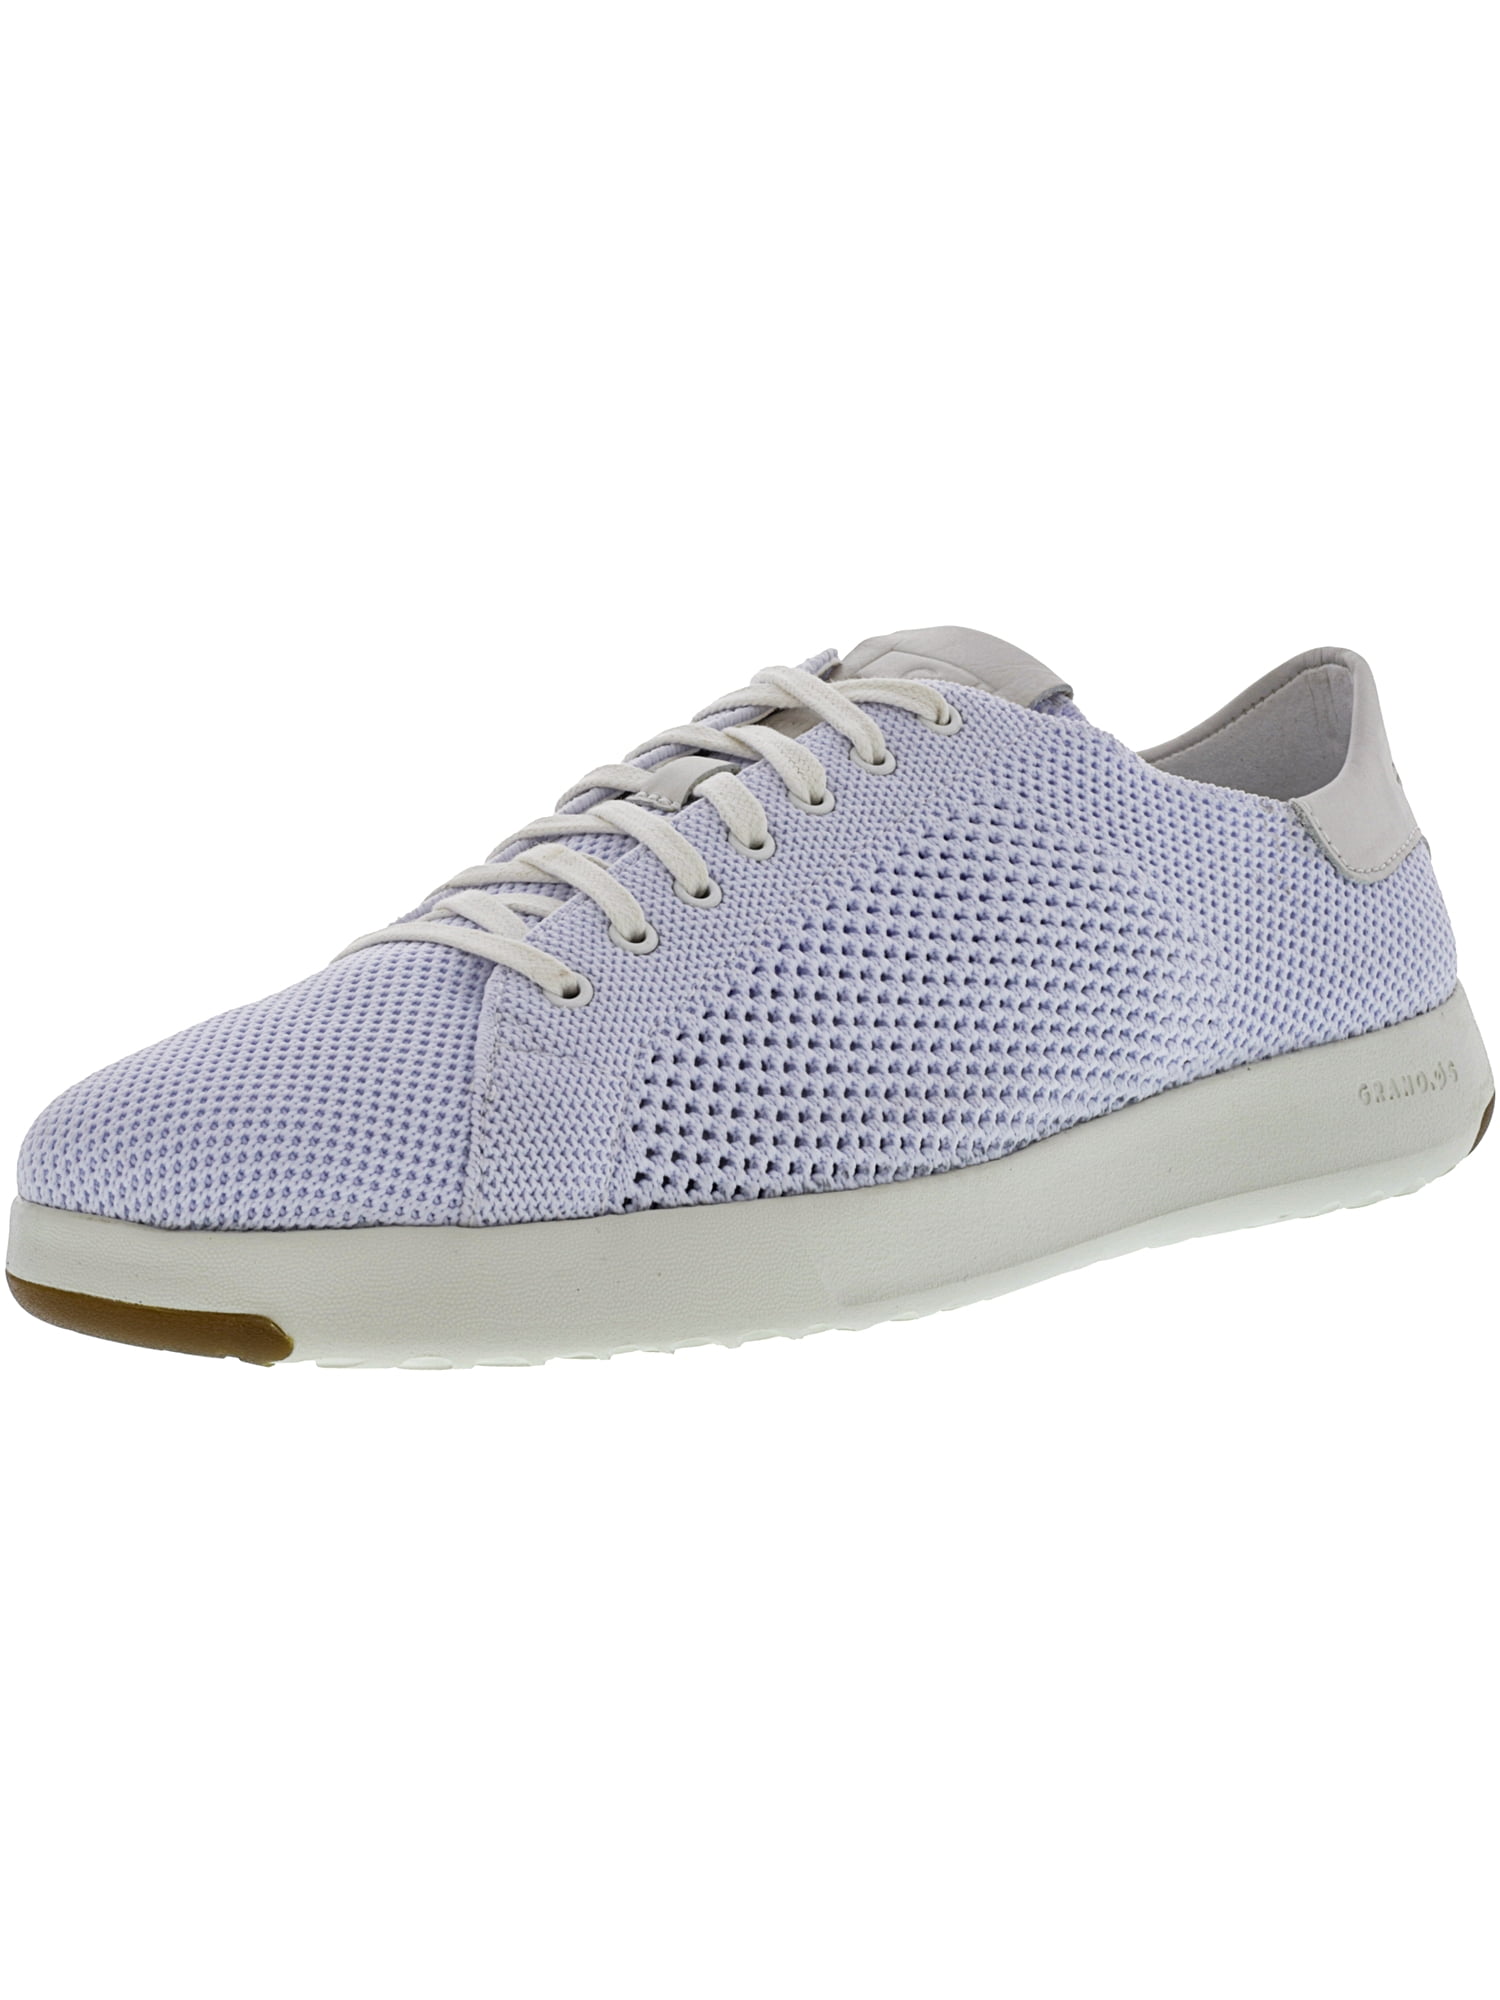 Cole Haan Men's Grandpro Tennis Stitchlite Optic White / Ankle-High ...